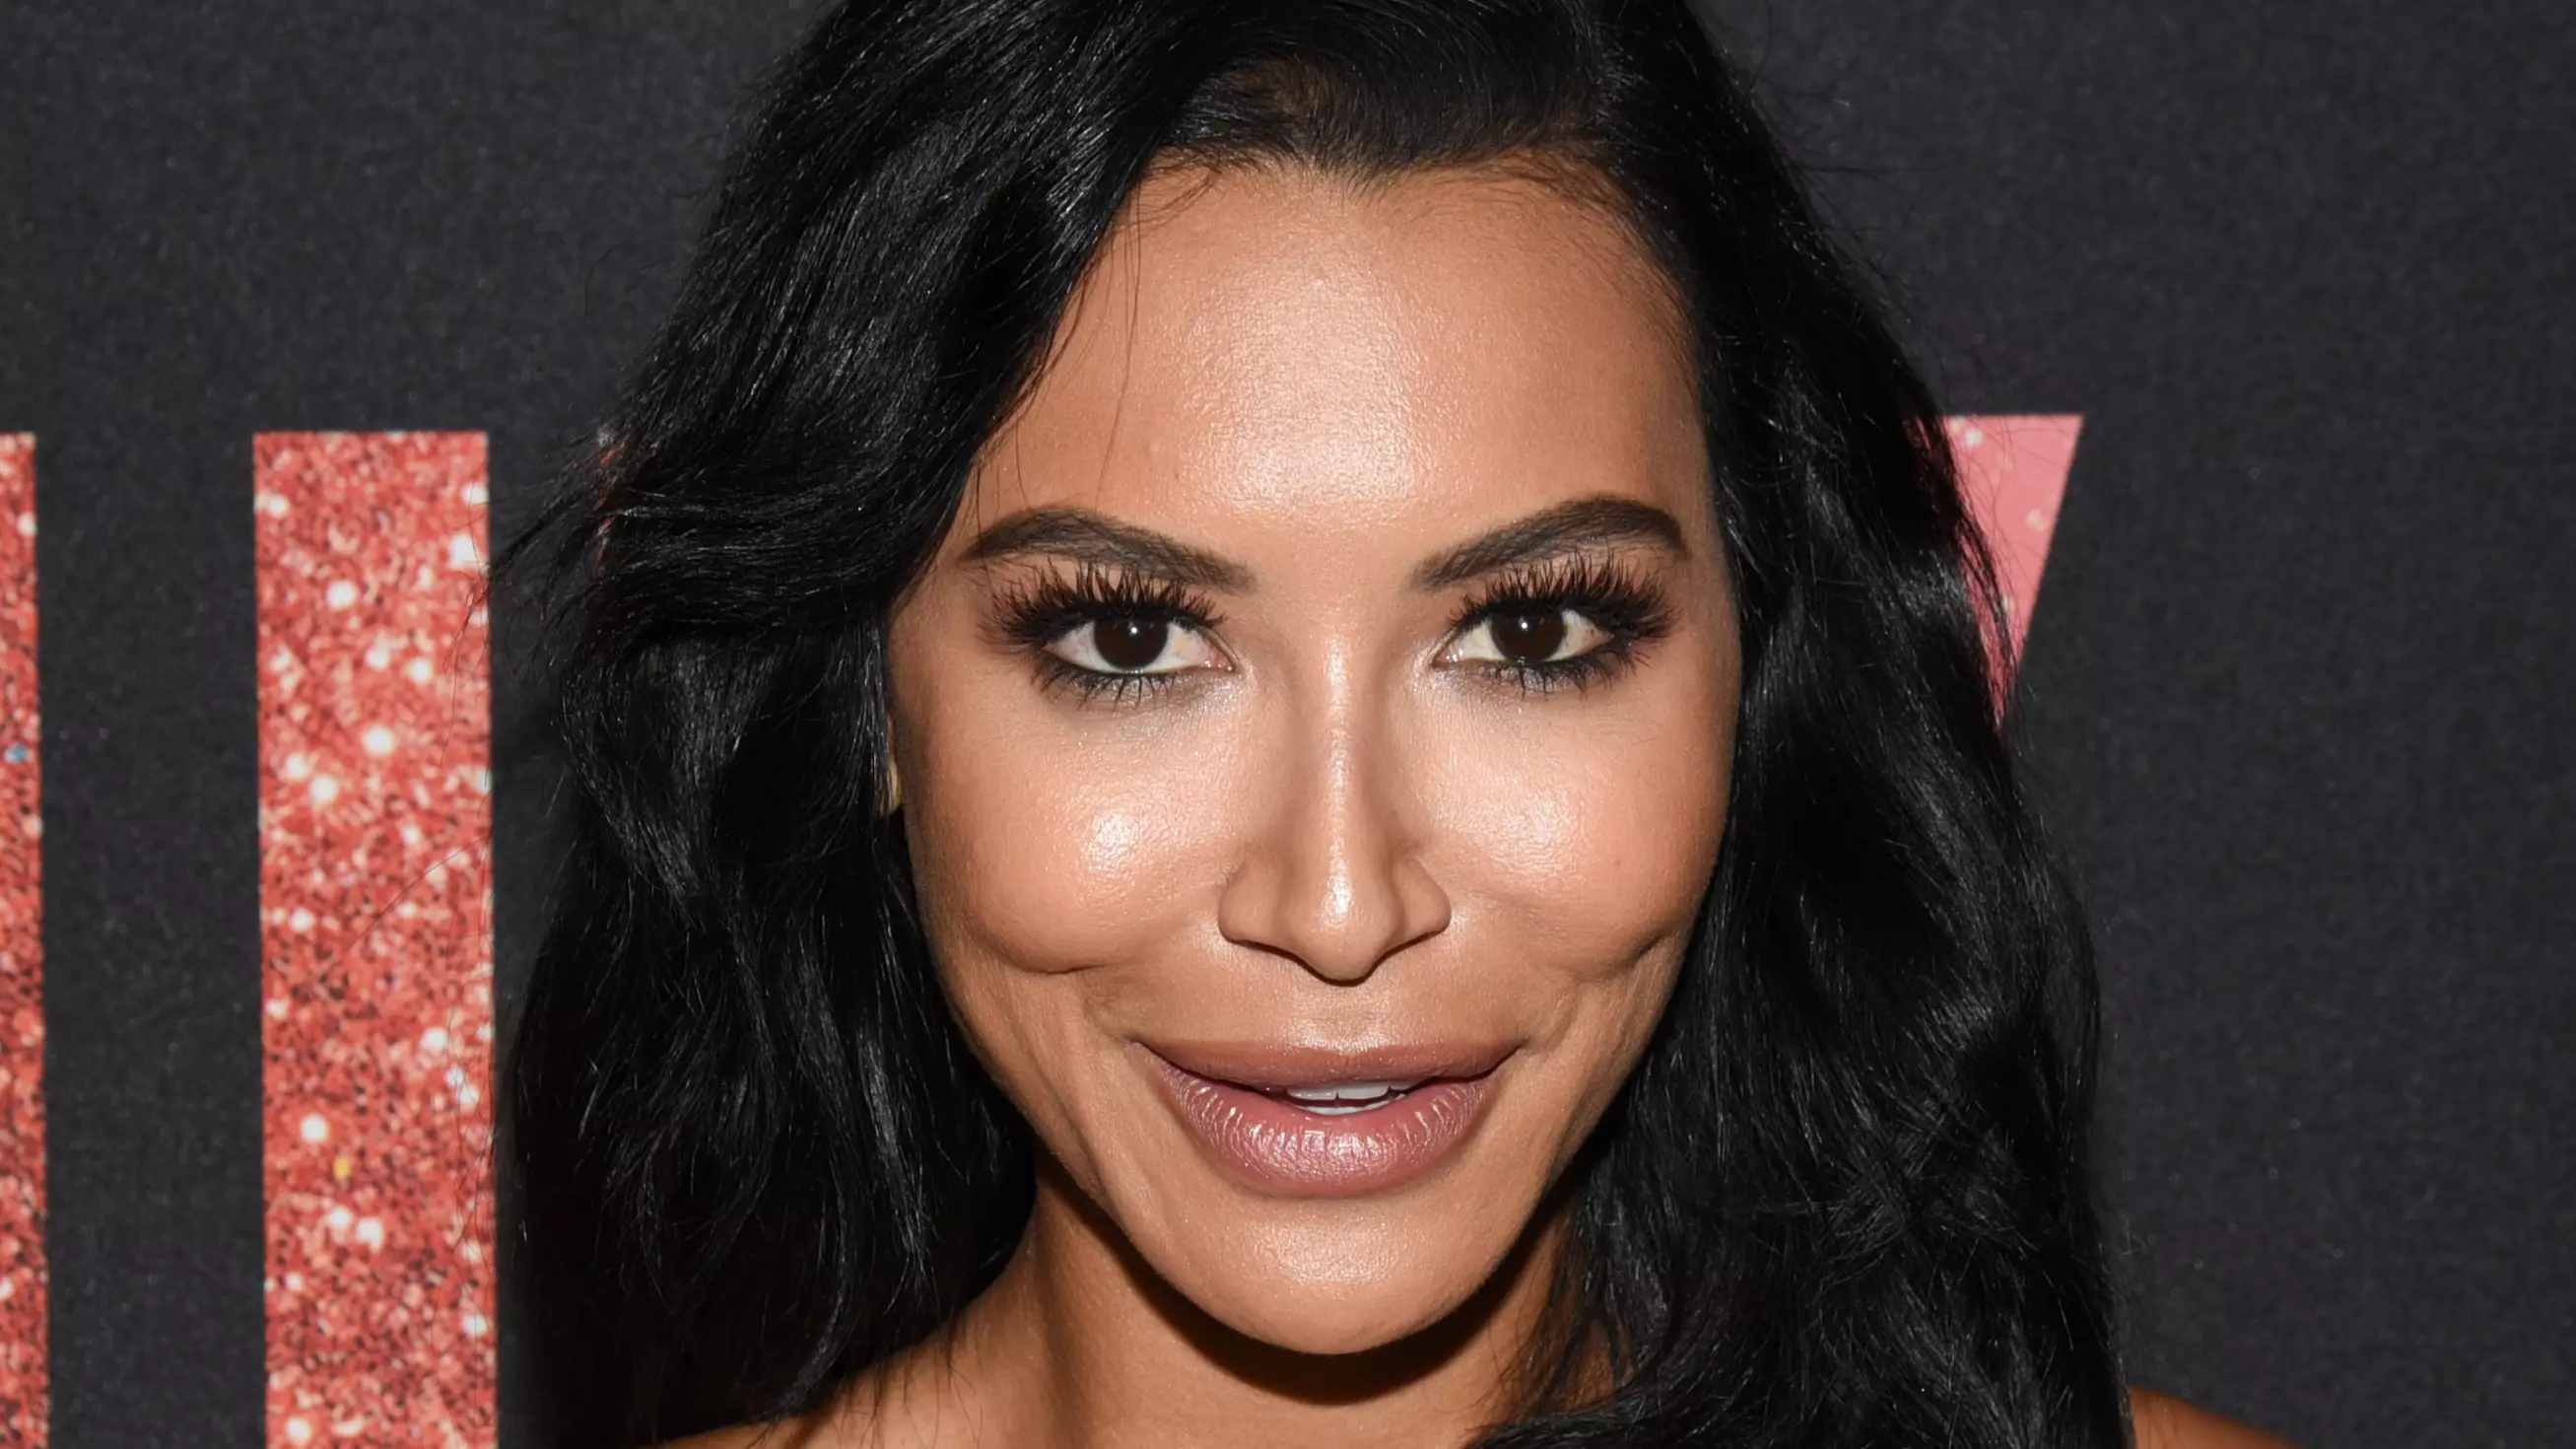 Police Confirm Naya Rivera's Body Has Been Recovered From Californian Lake